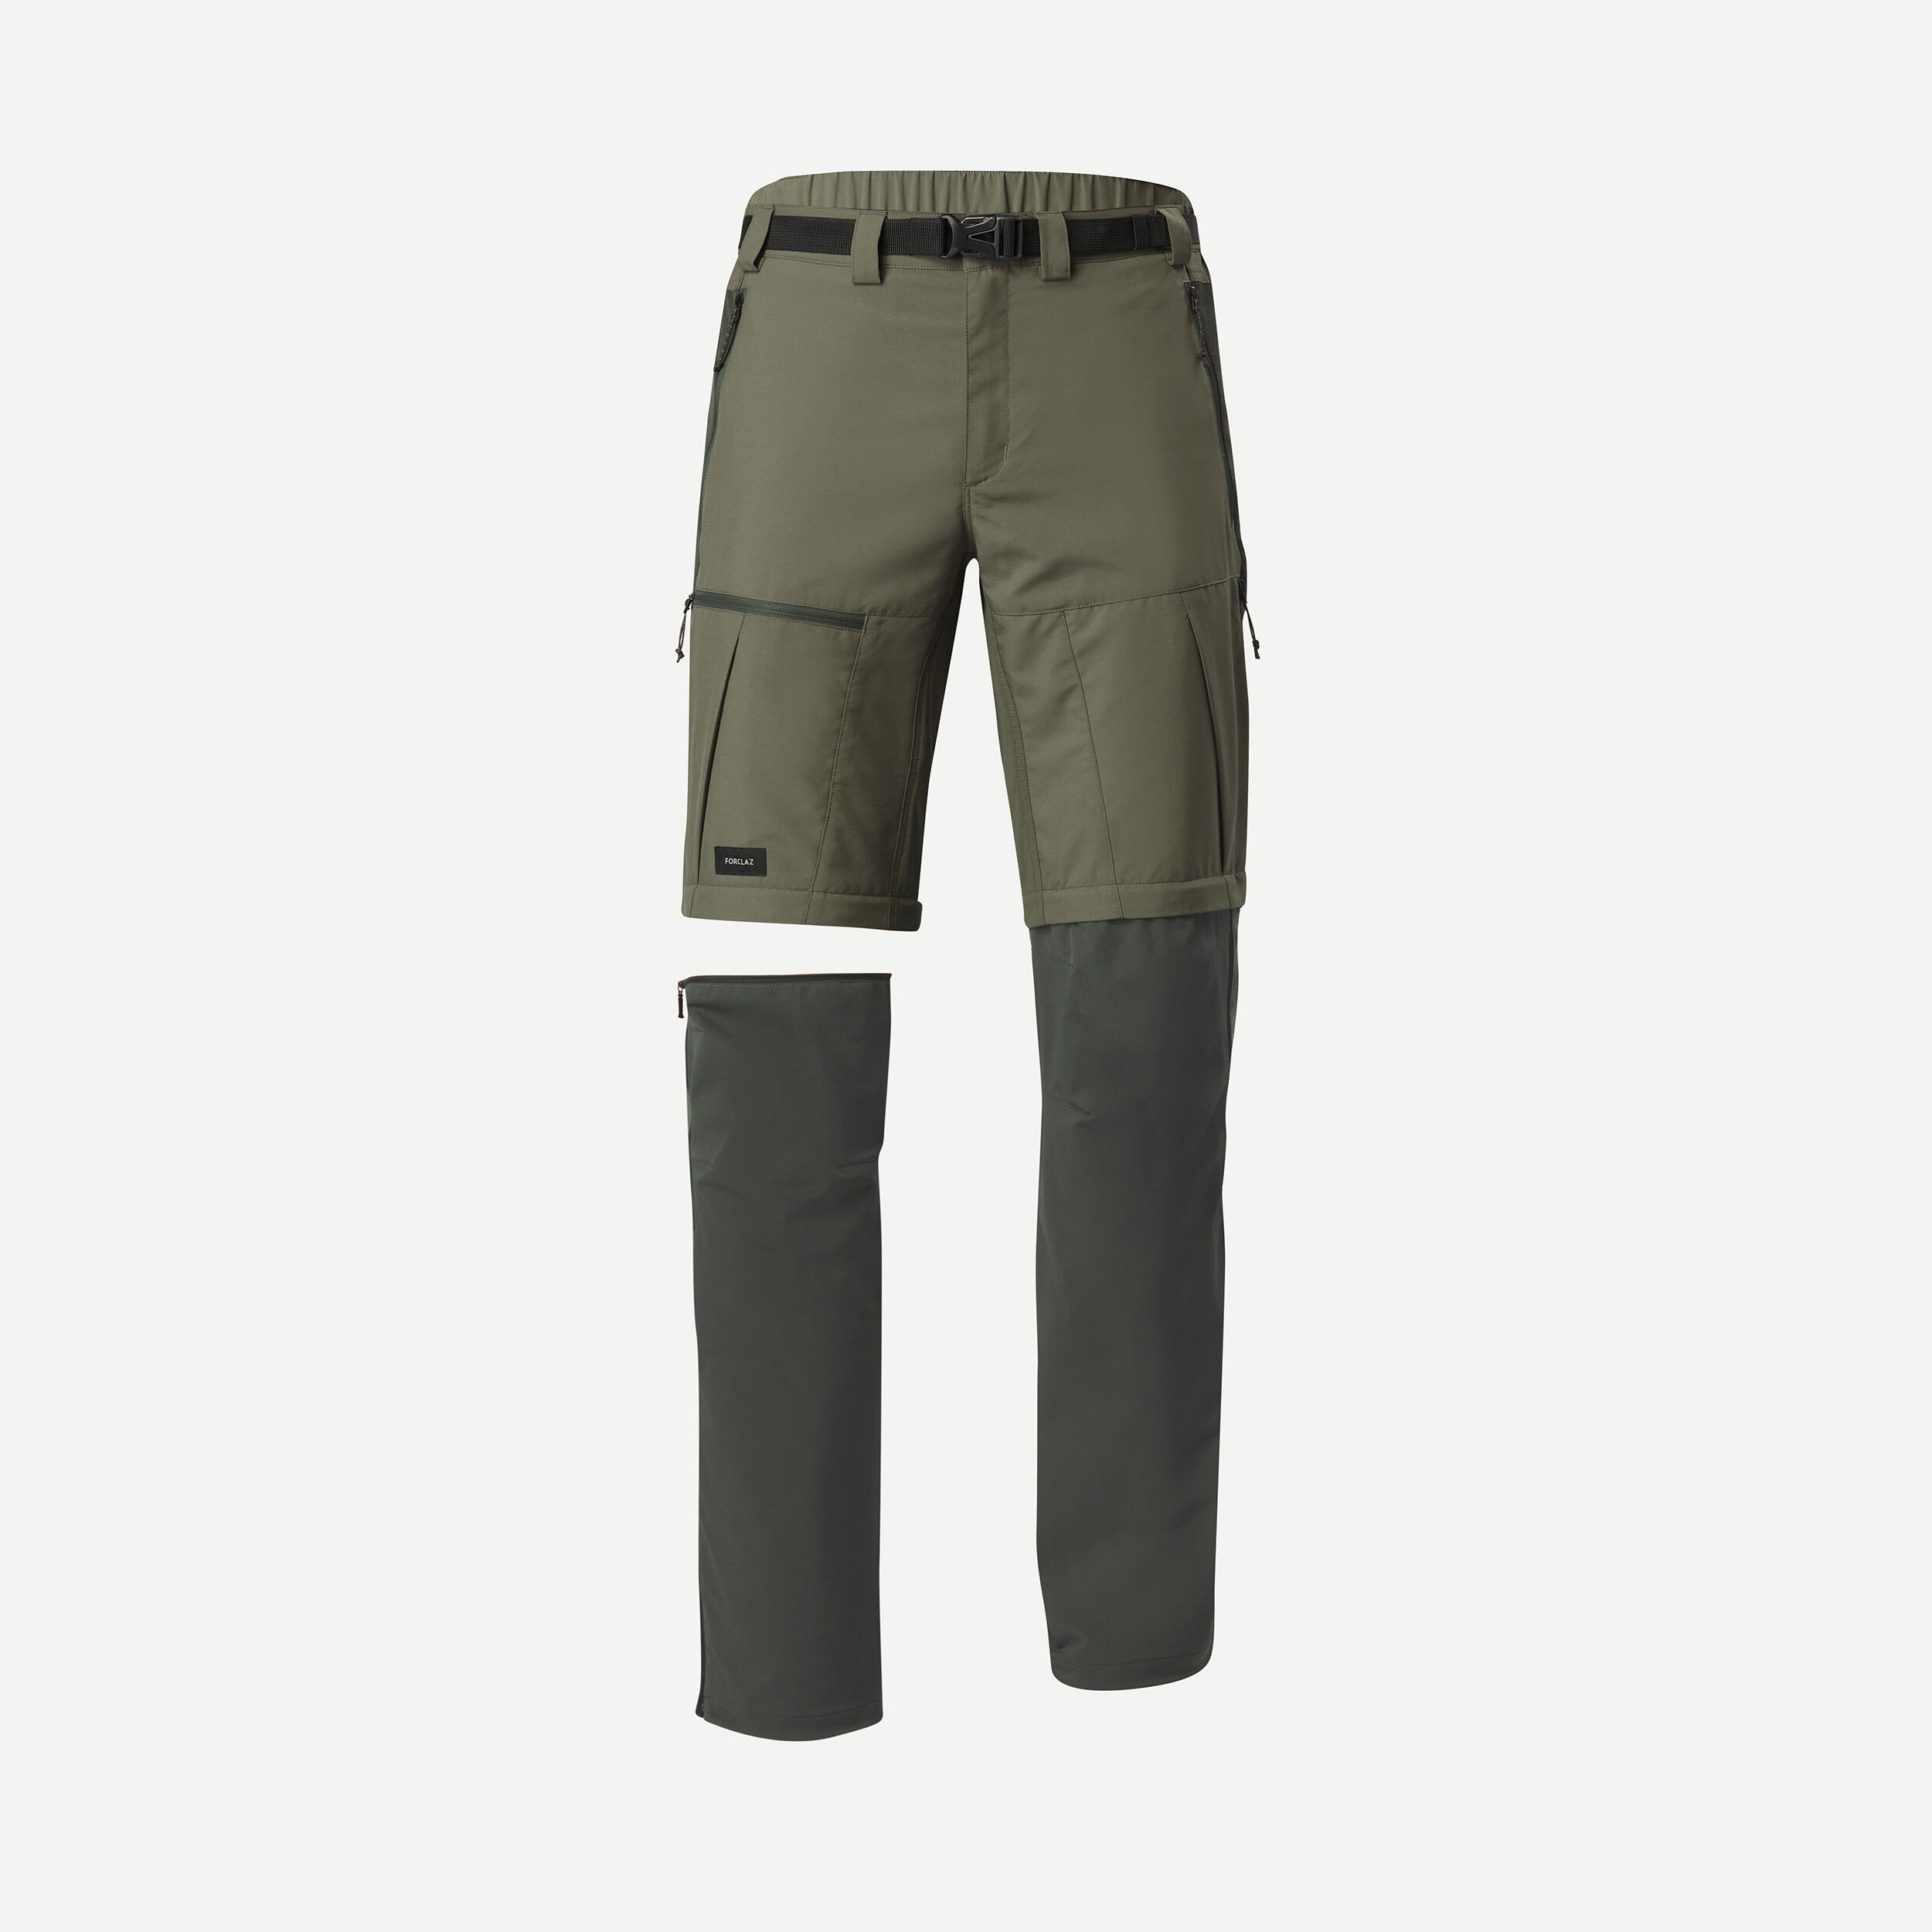 FORCLAZ Men's 2-in-1 adjustable and robust hiking trousers – MT500